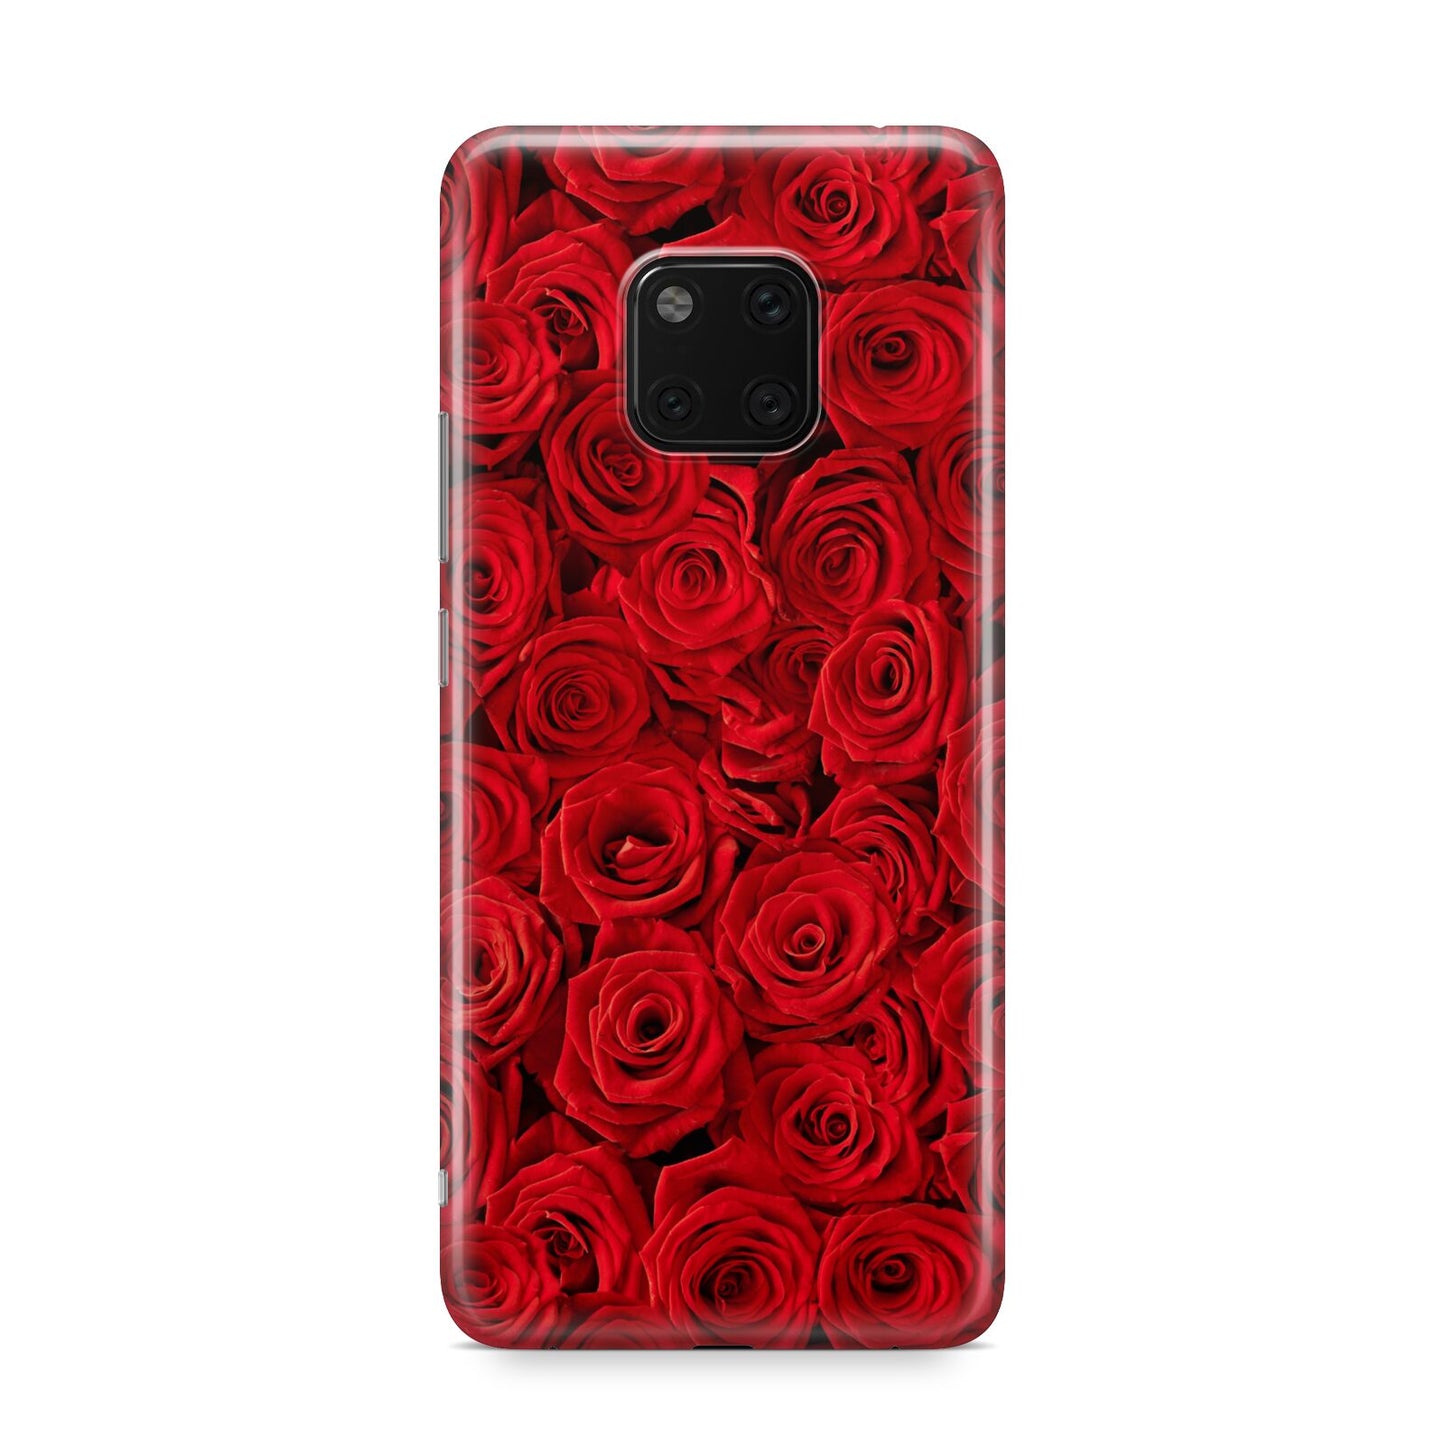 test THNG23 342 Huawei Mate 20 Pro Phone Case